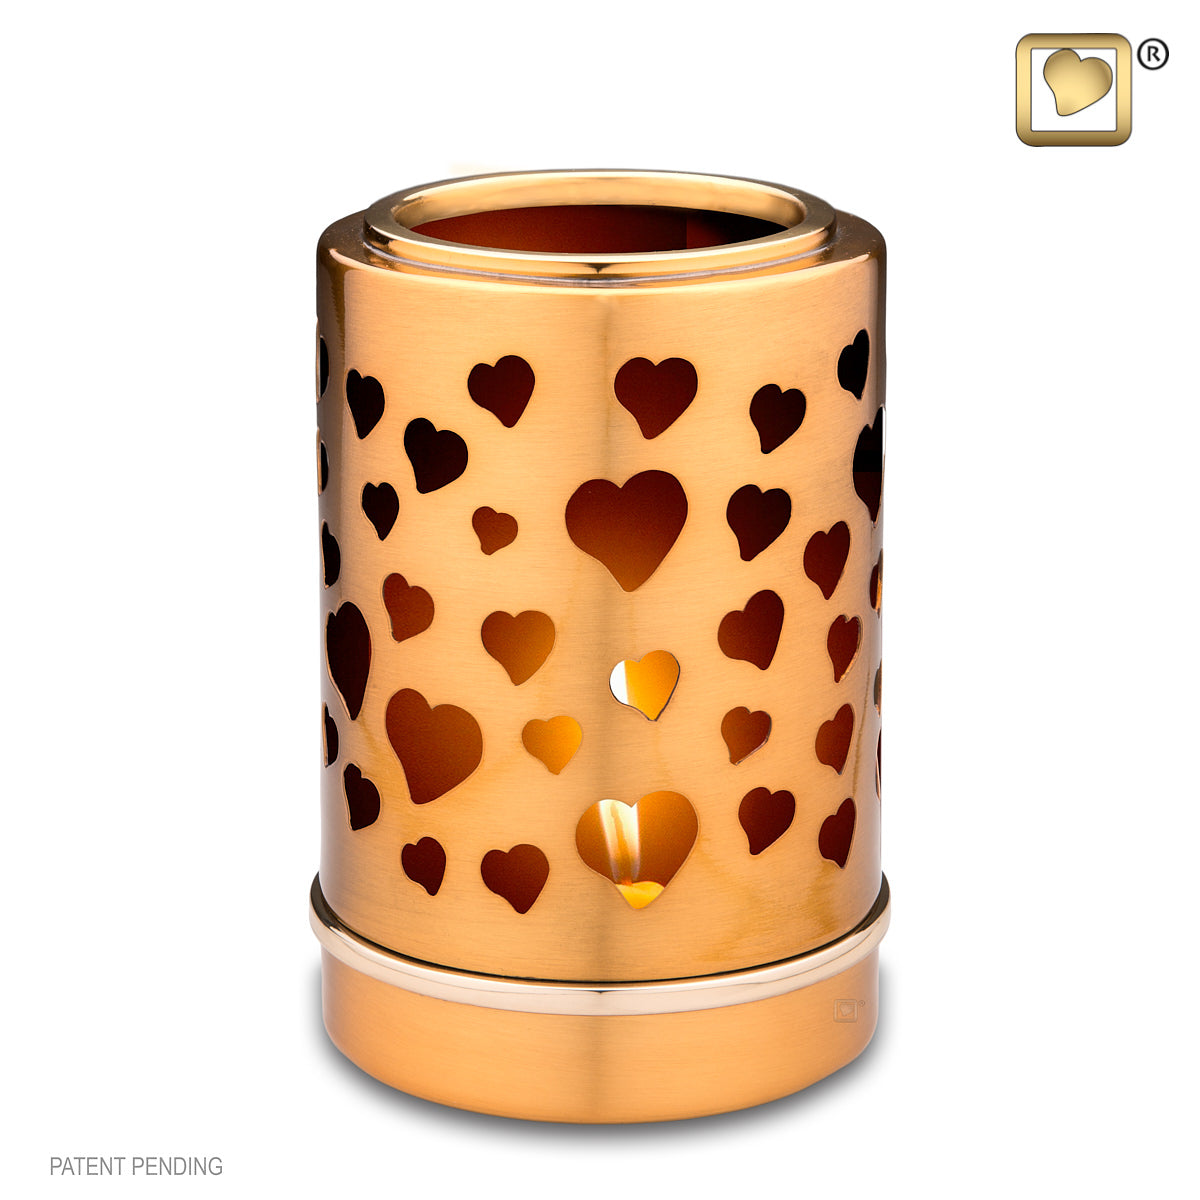 Reflections of Love (Tealight Urn)